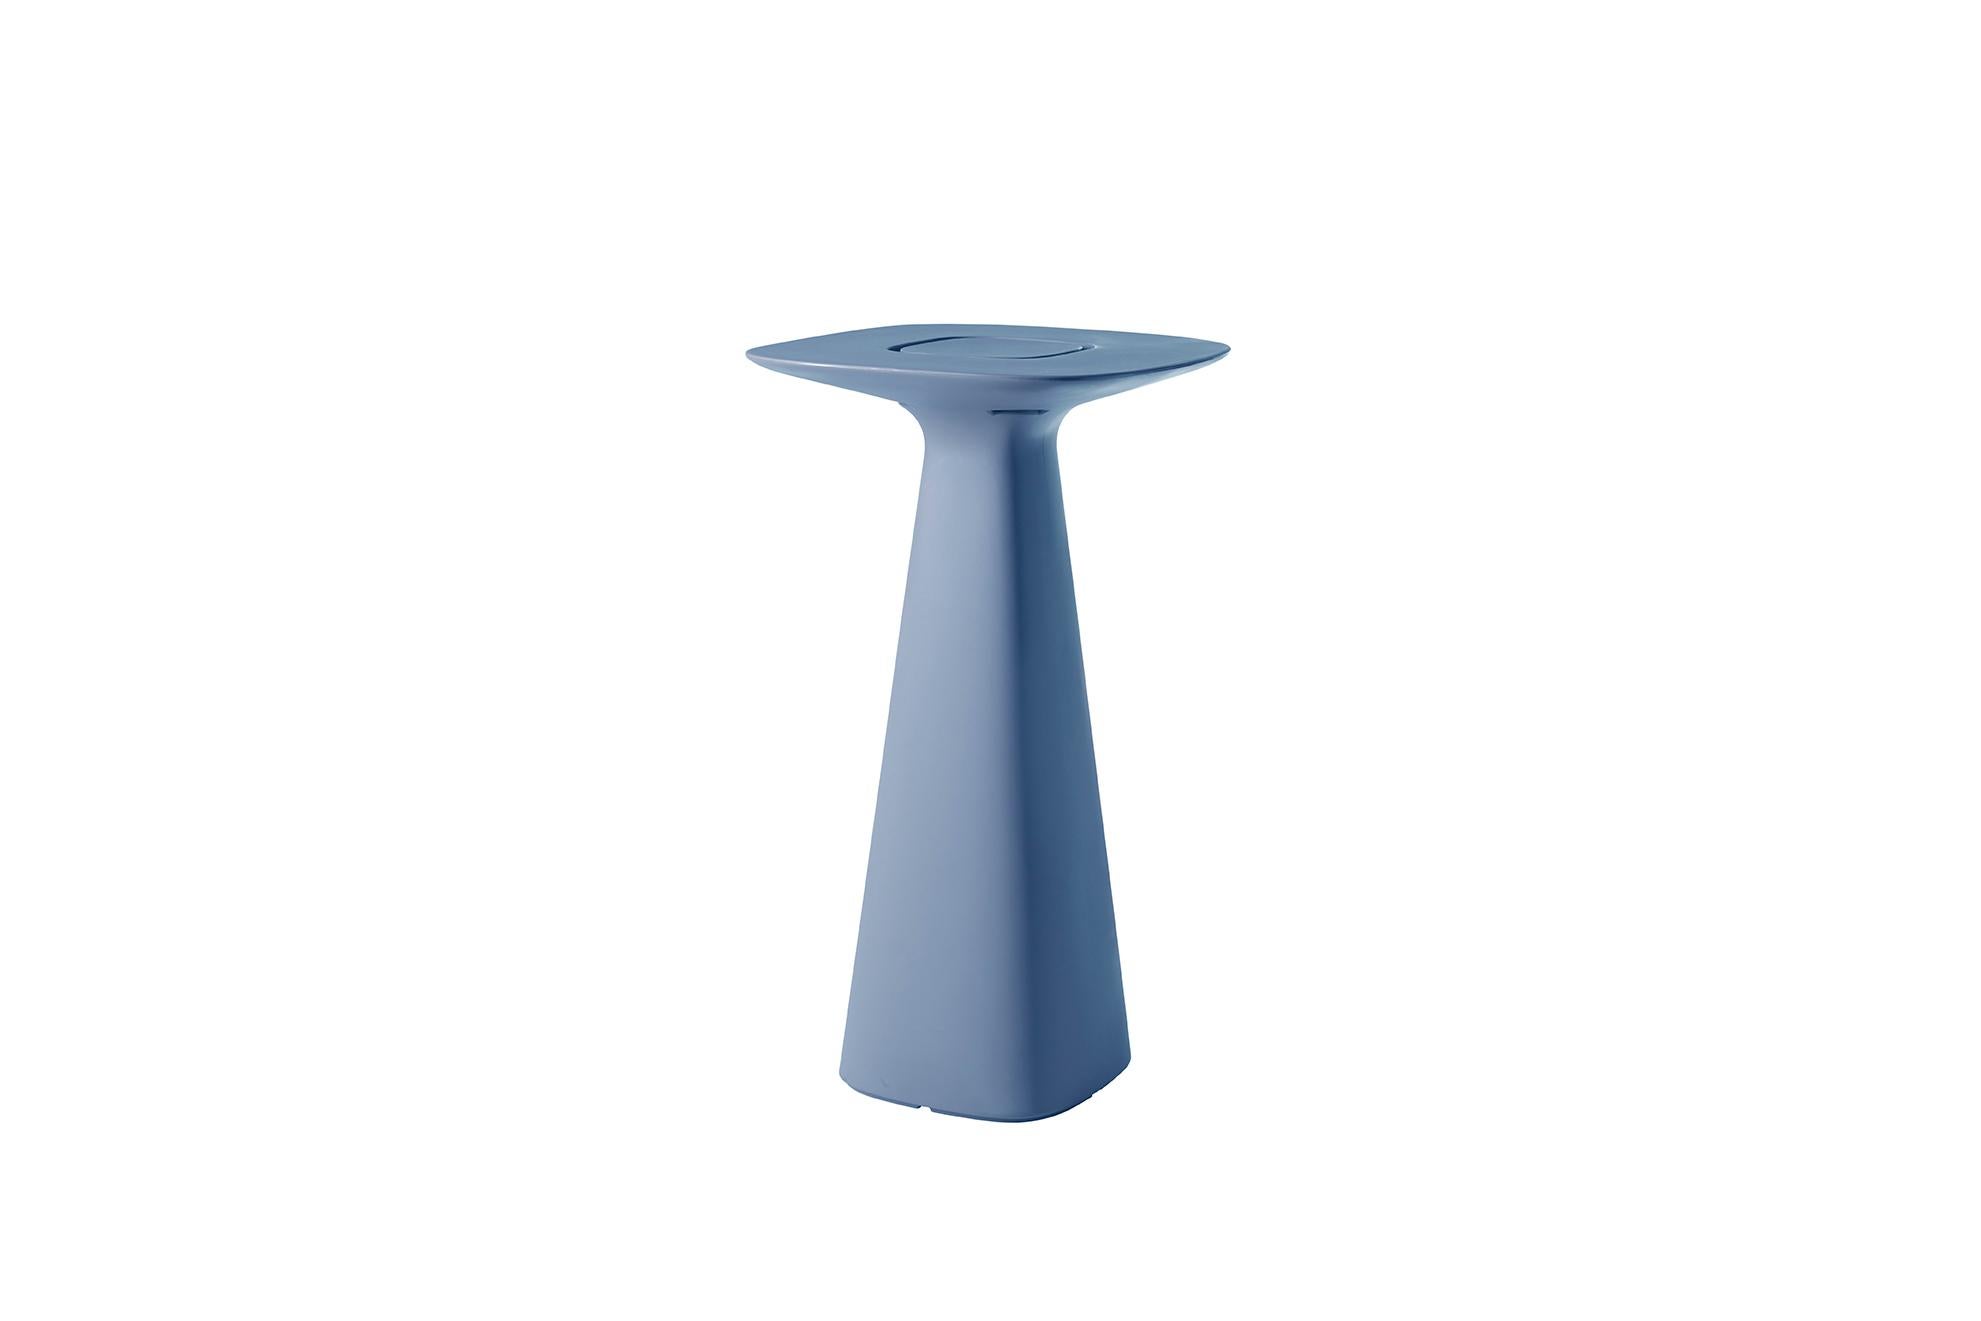 Slide Design Amélie Up Table in Powder Blue by Italo Pertichini For Sale